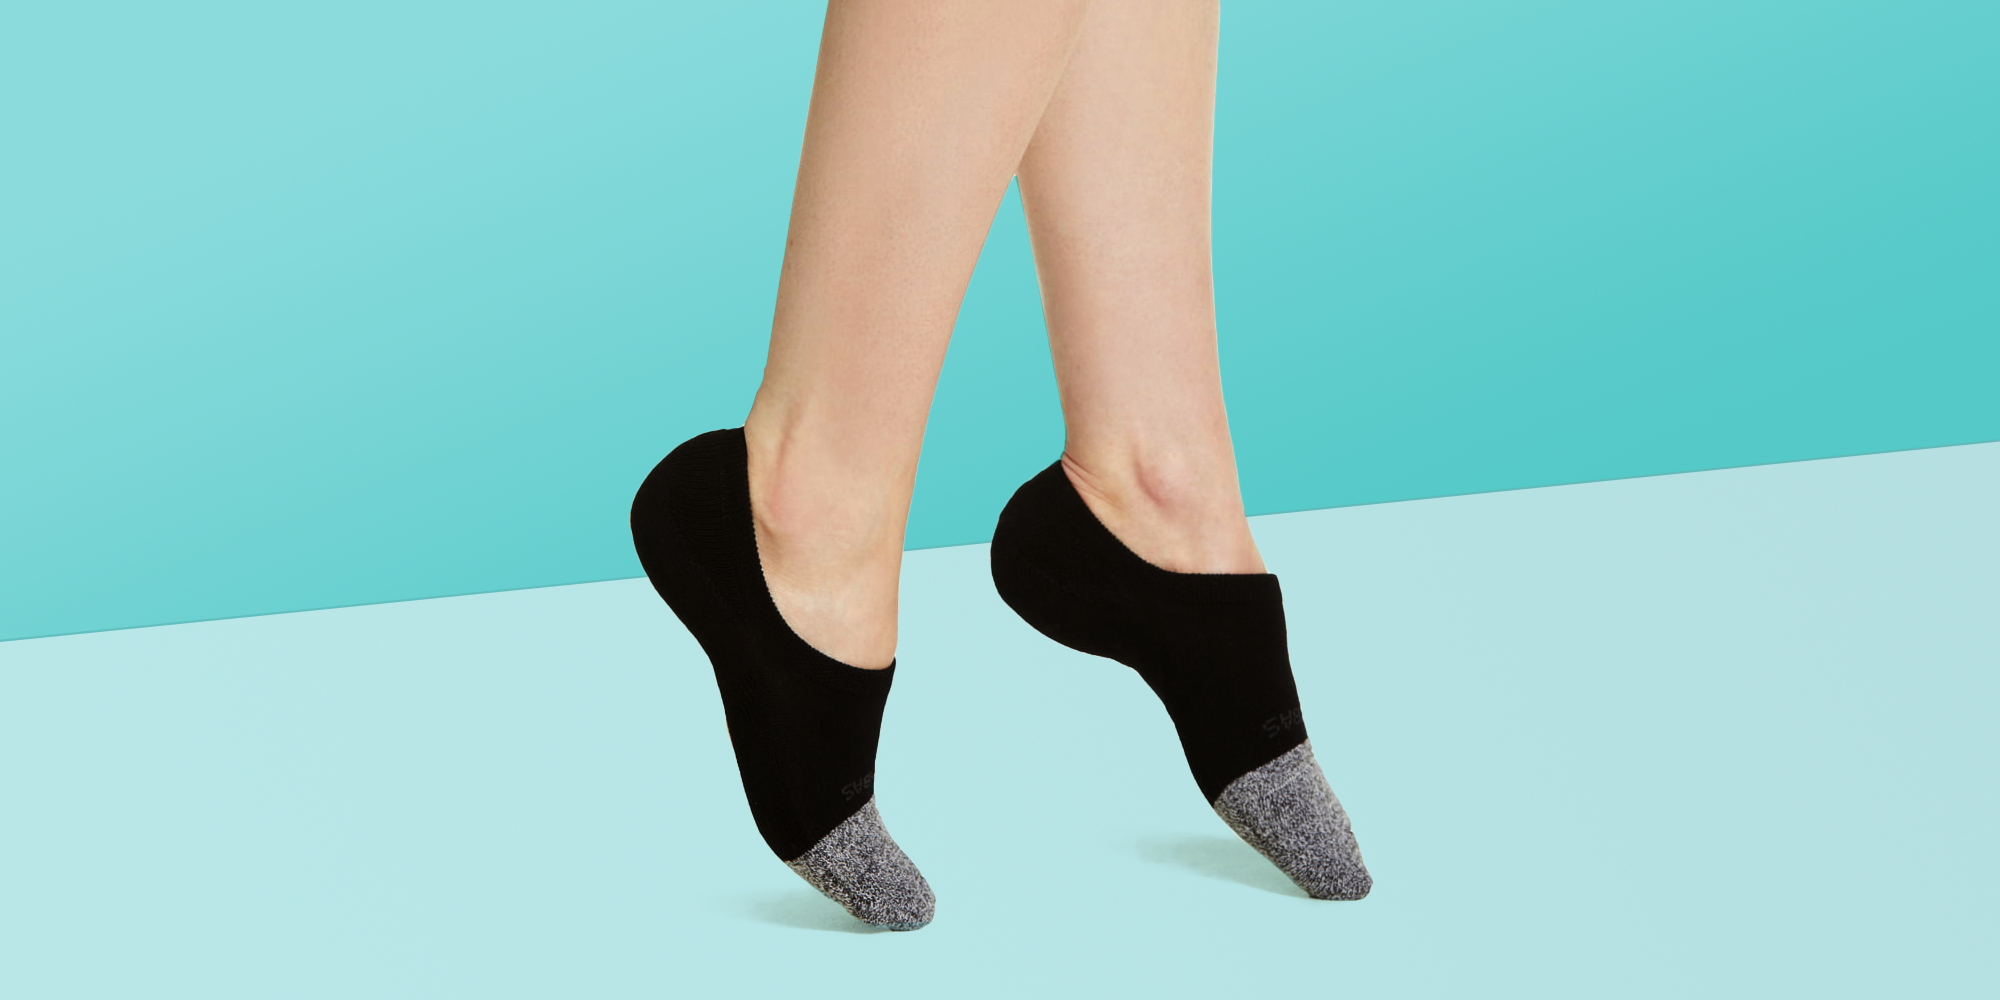 11 Best No-Show Socks - Top-Rated 